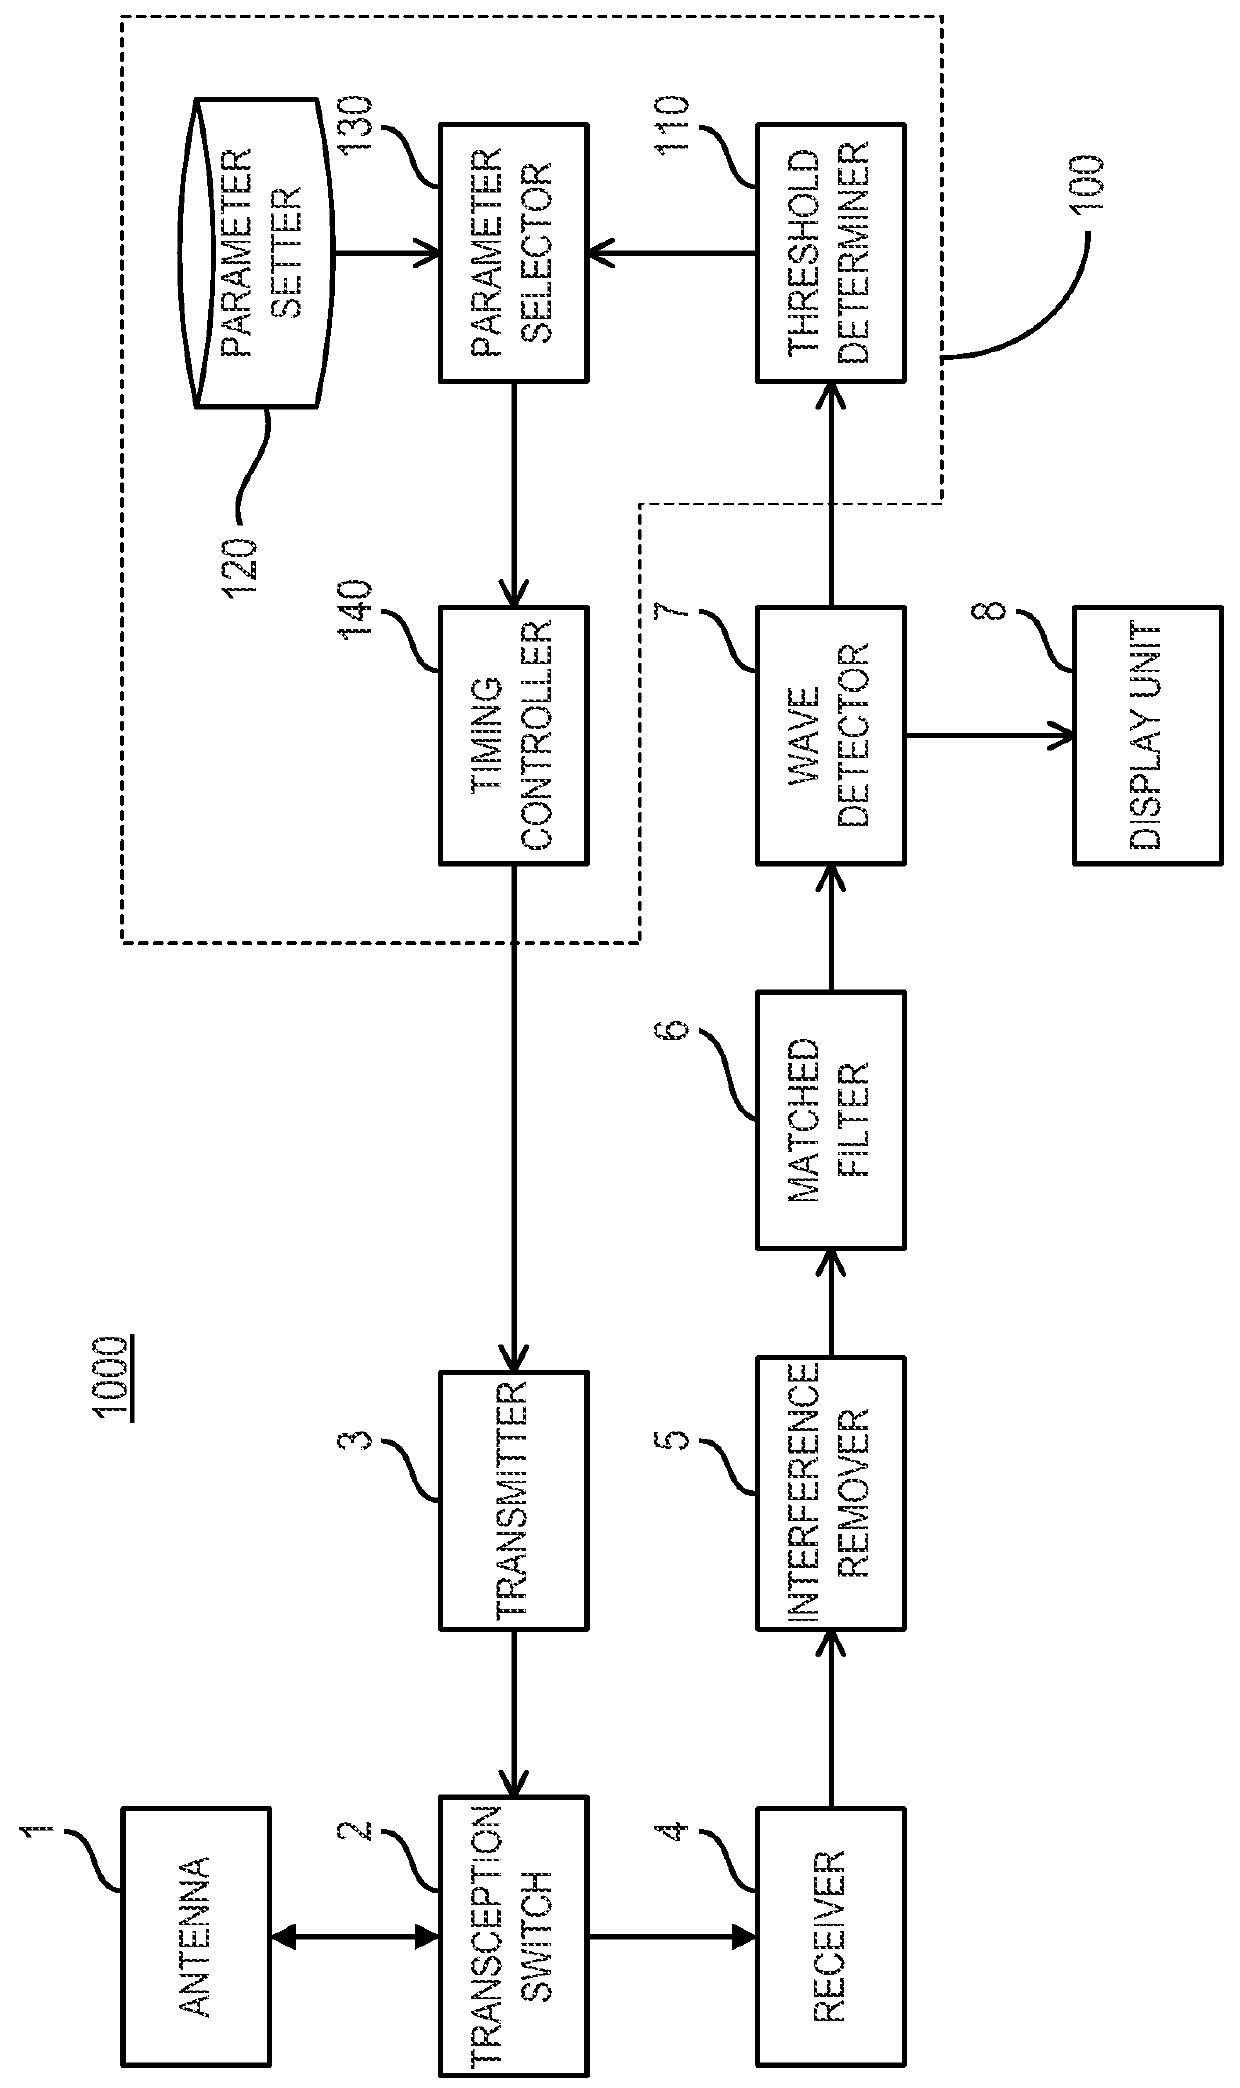 Apparatus and method for detecting target object